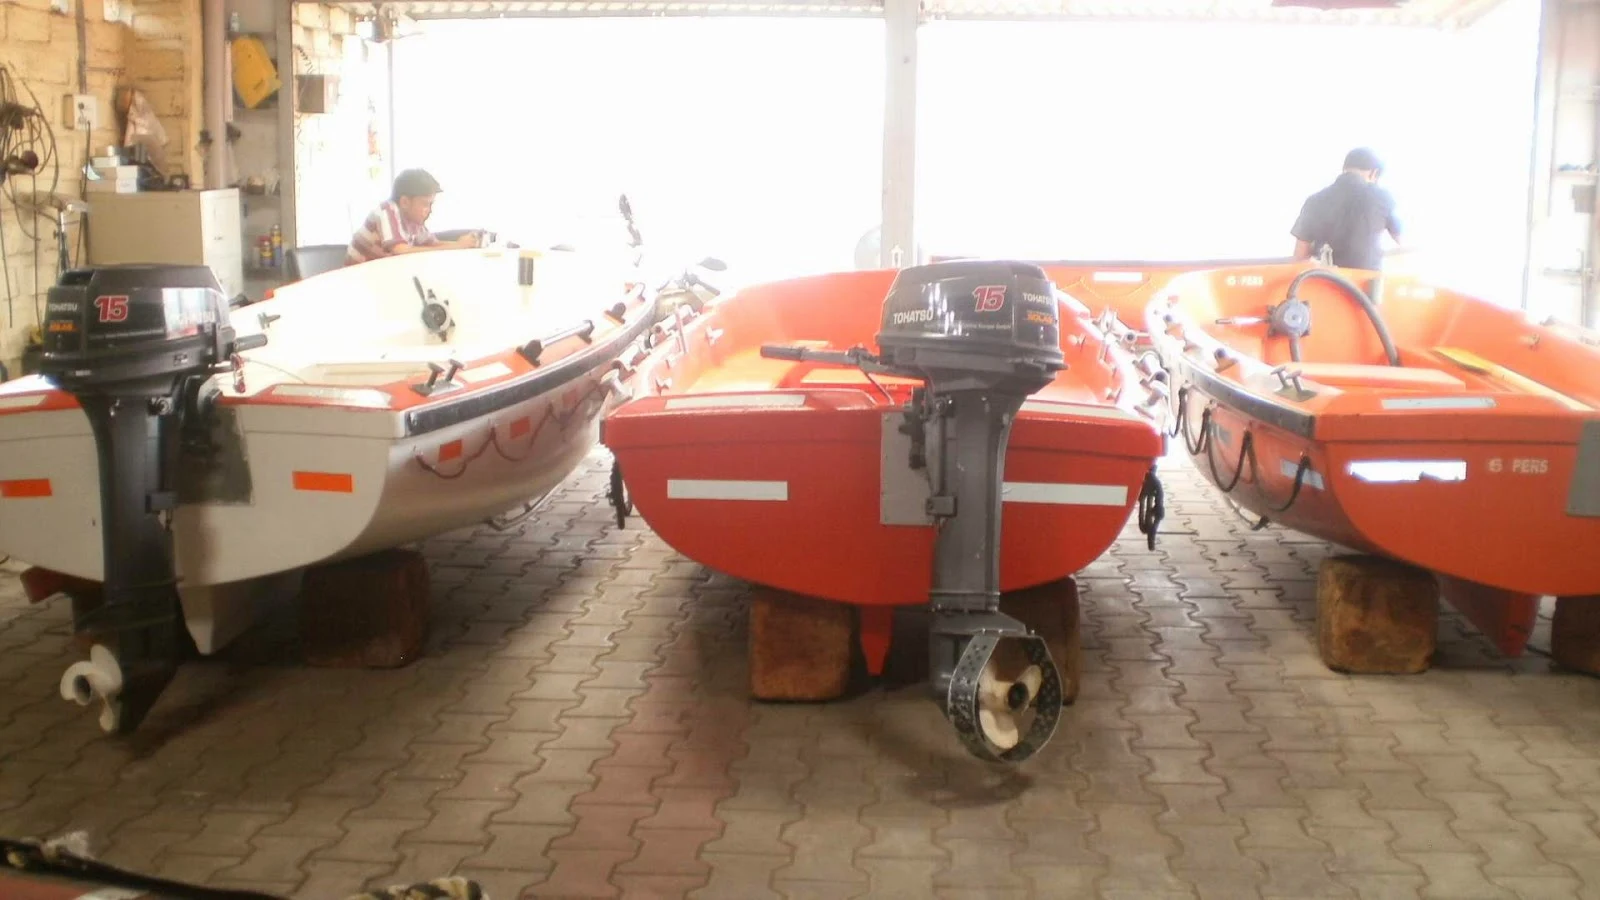 used outboard engine and boats for sale, used fiber boats for fishing, river boats, small boats for sale